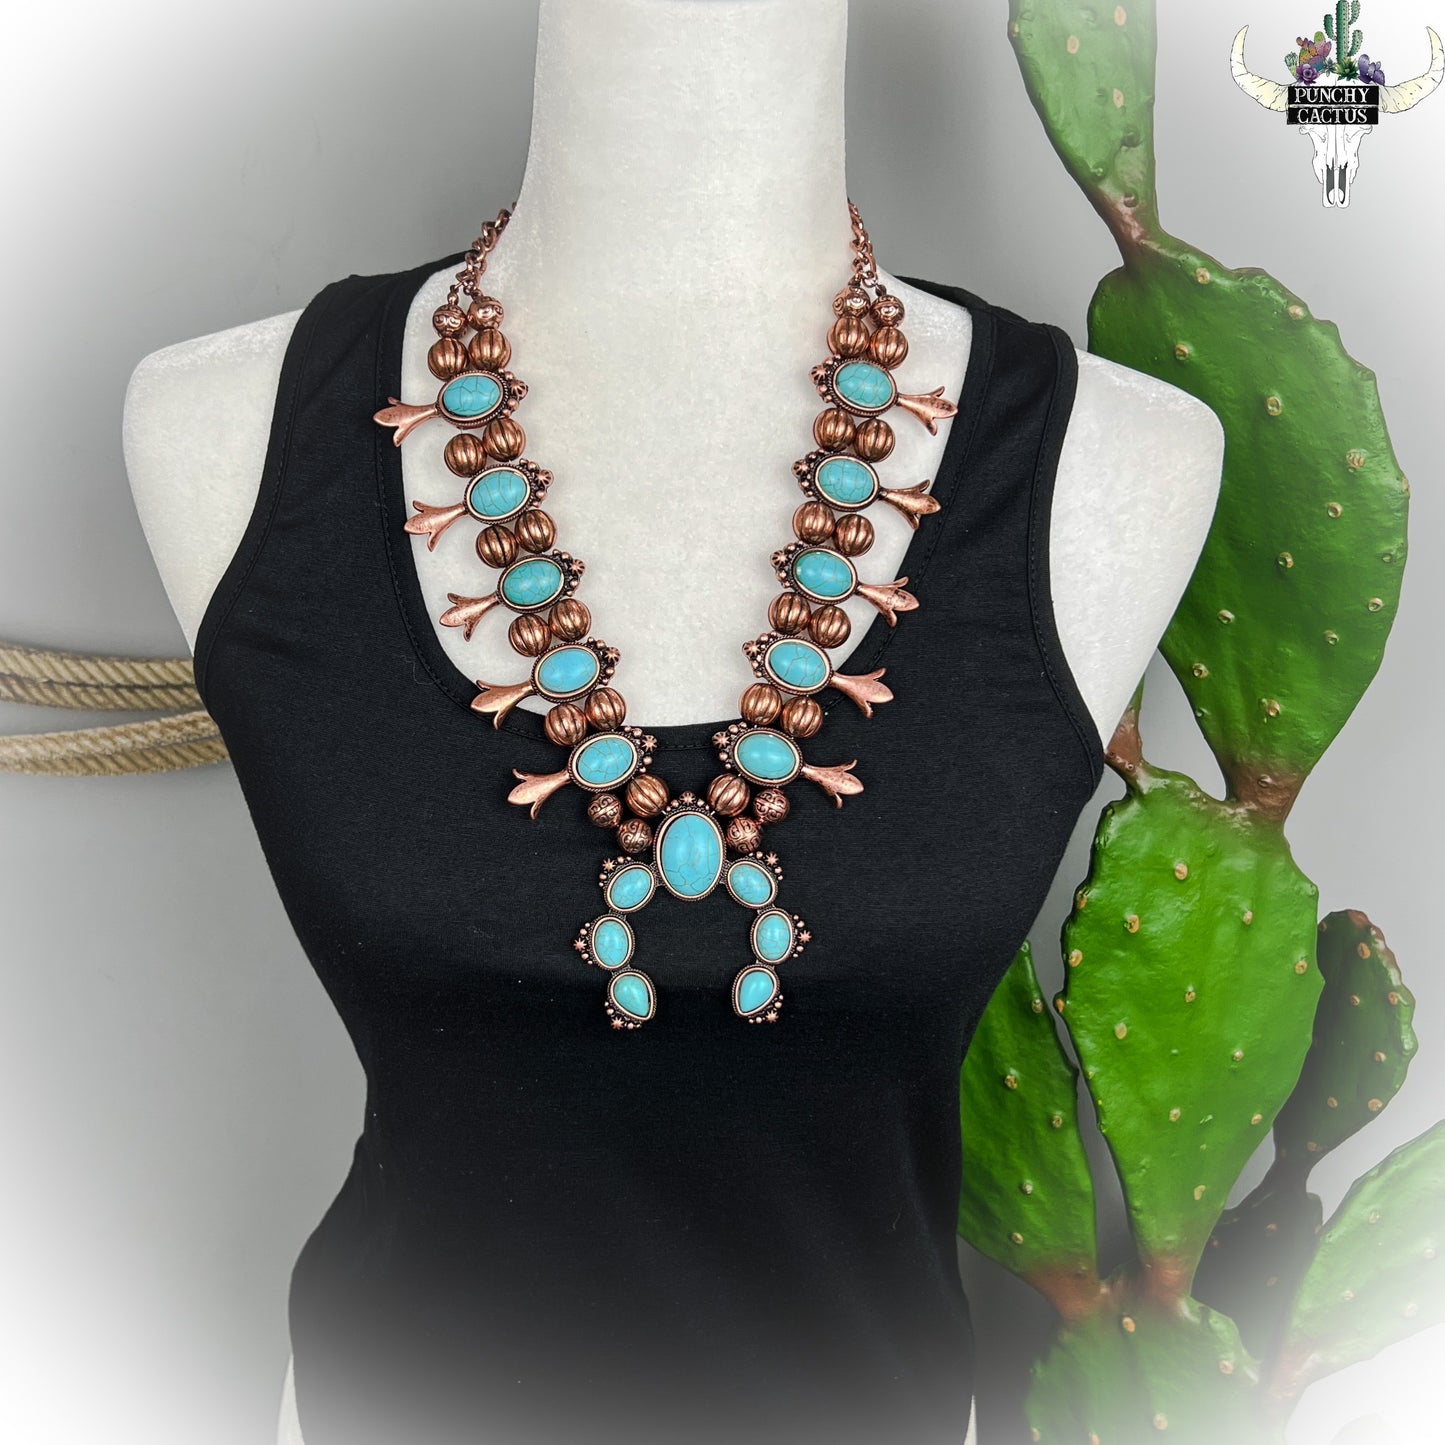 Squash Blossom Necklace & Earring Set - Bronze & Turquoise